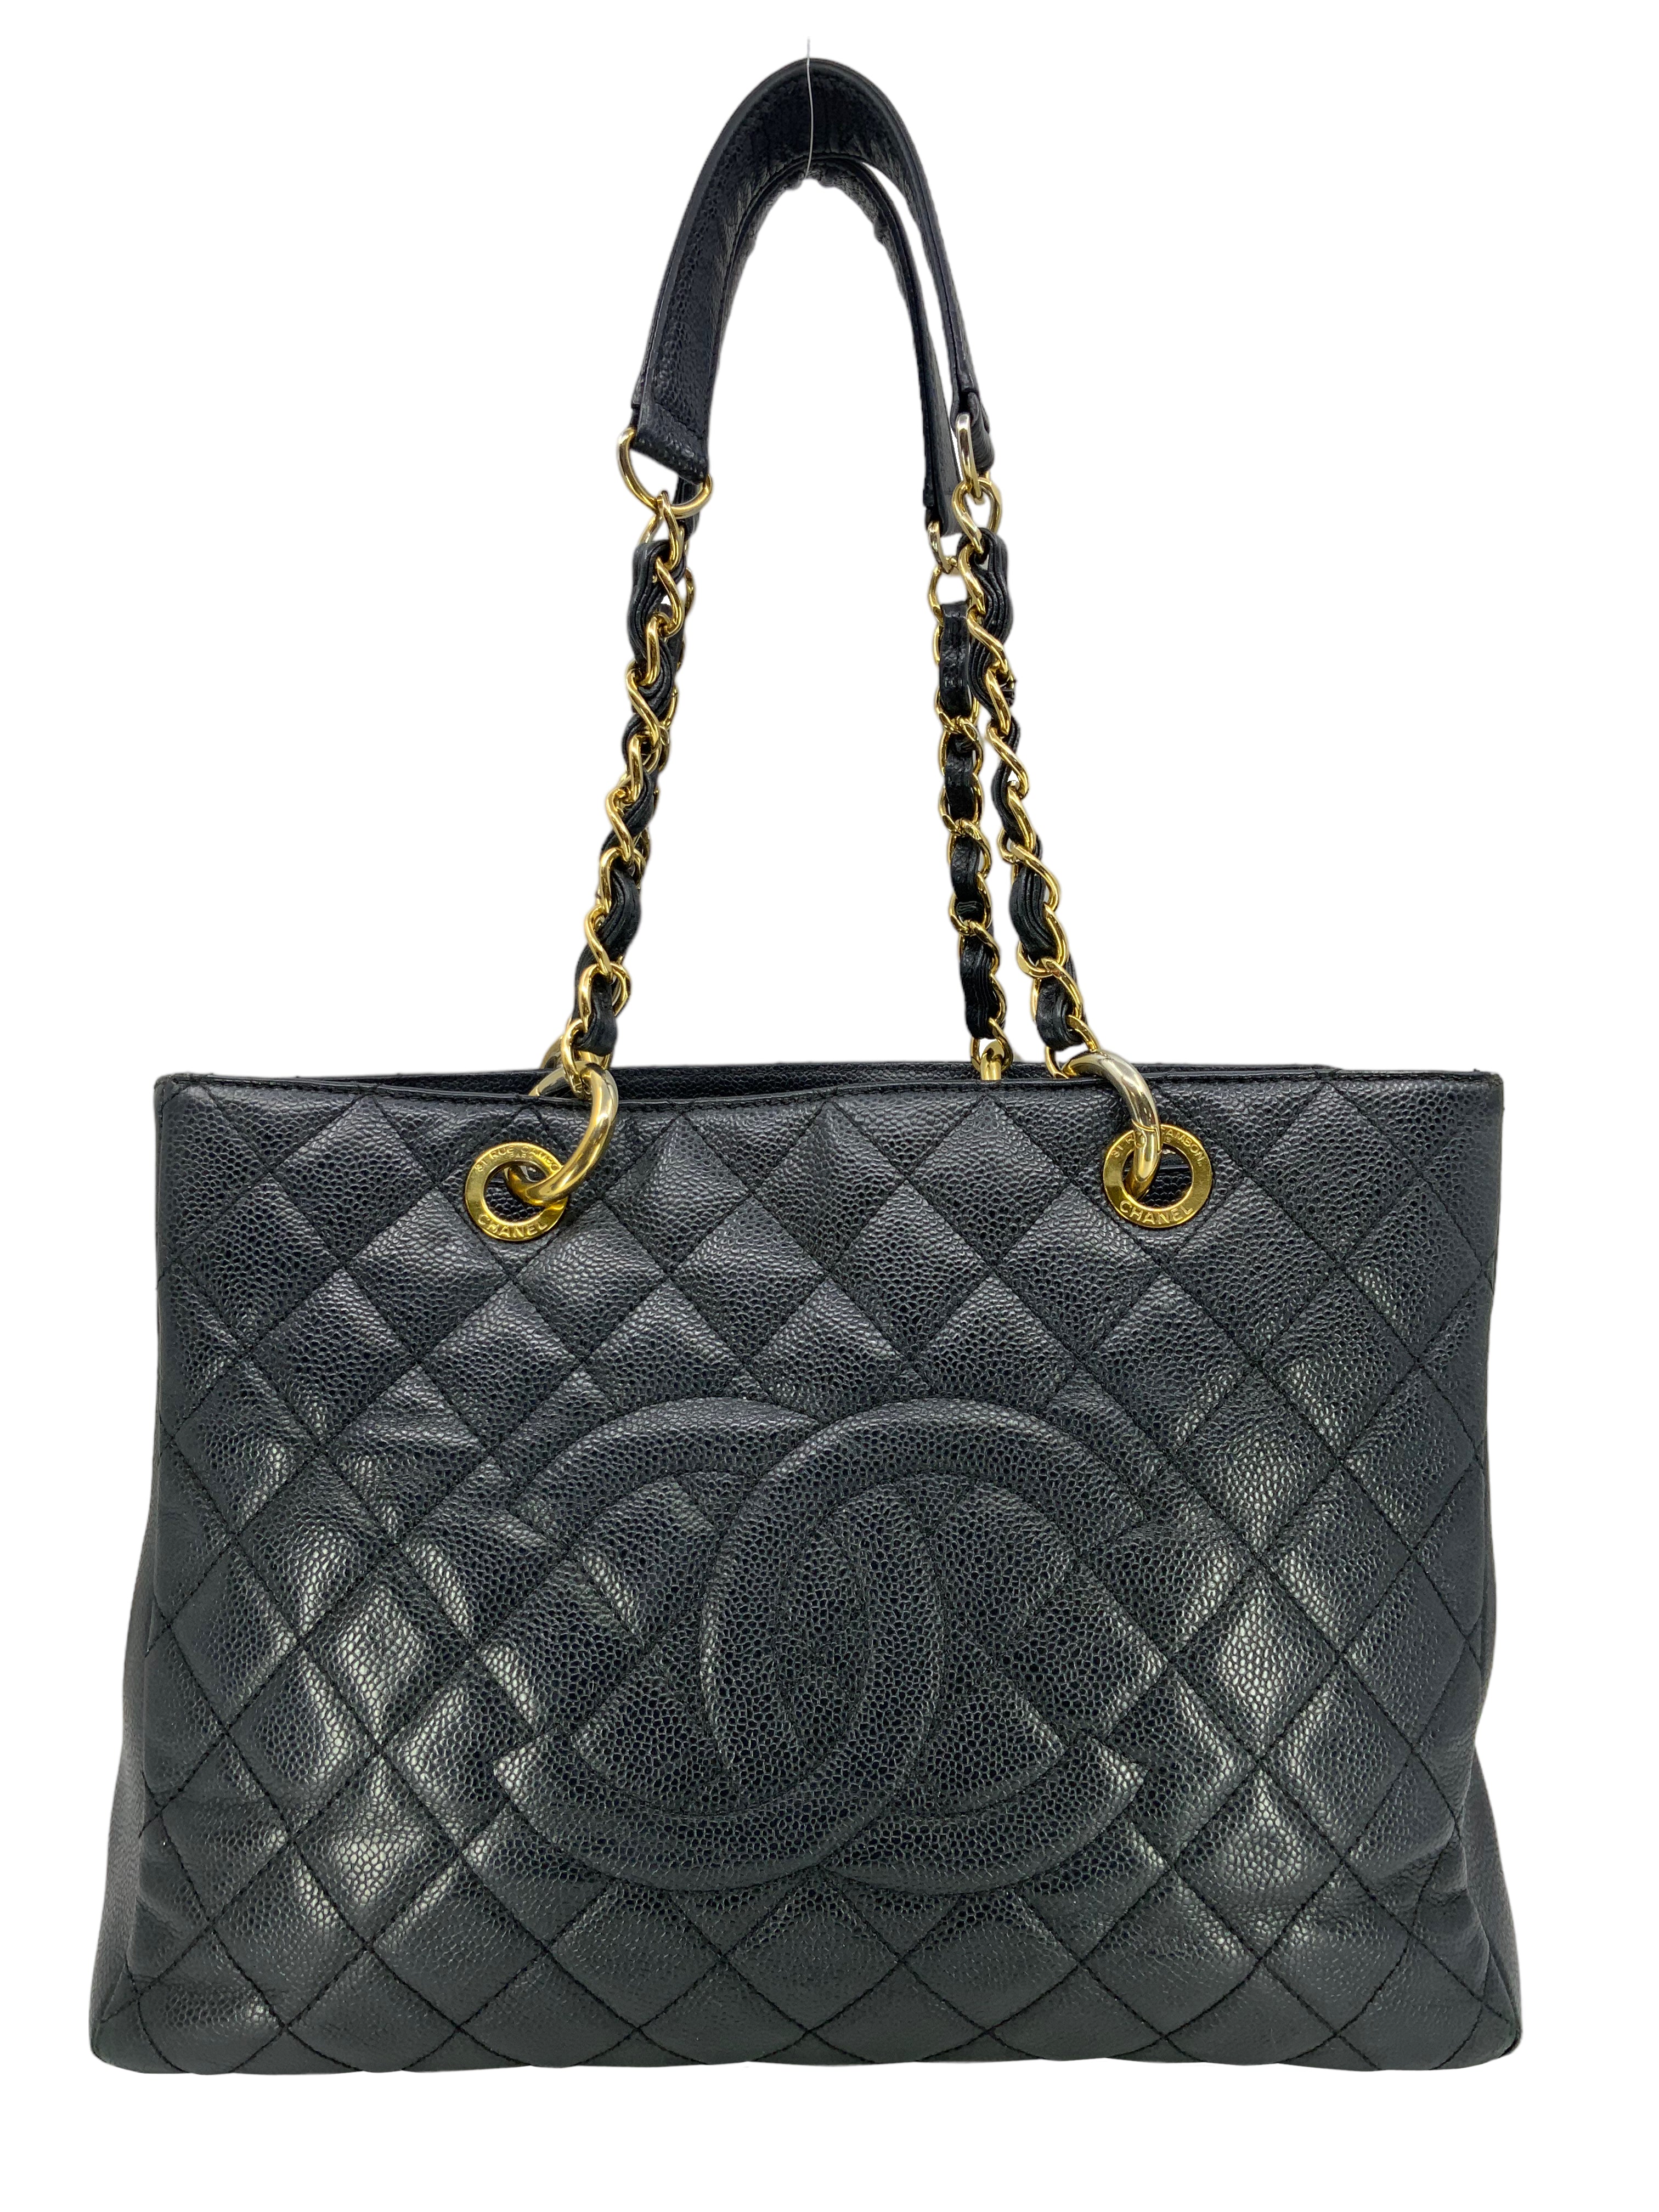 Authentic Chanel Black Quilted Caviar Leather Grand Shopper Tote